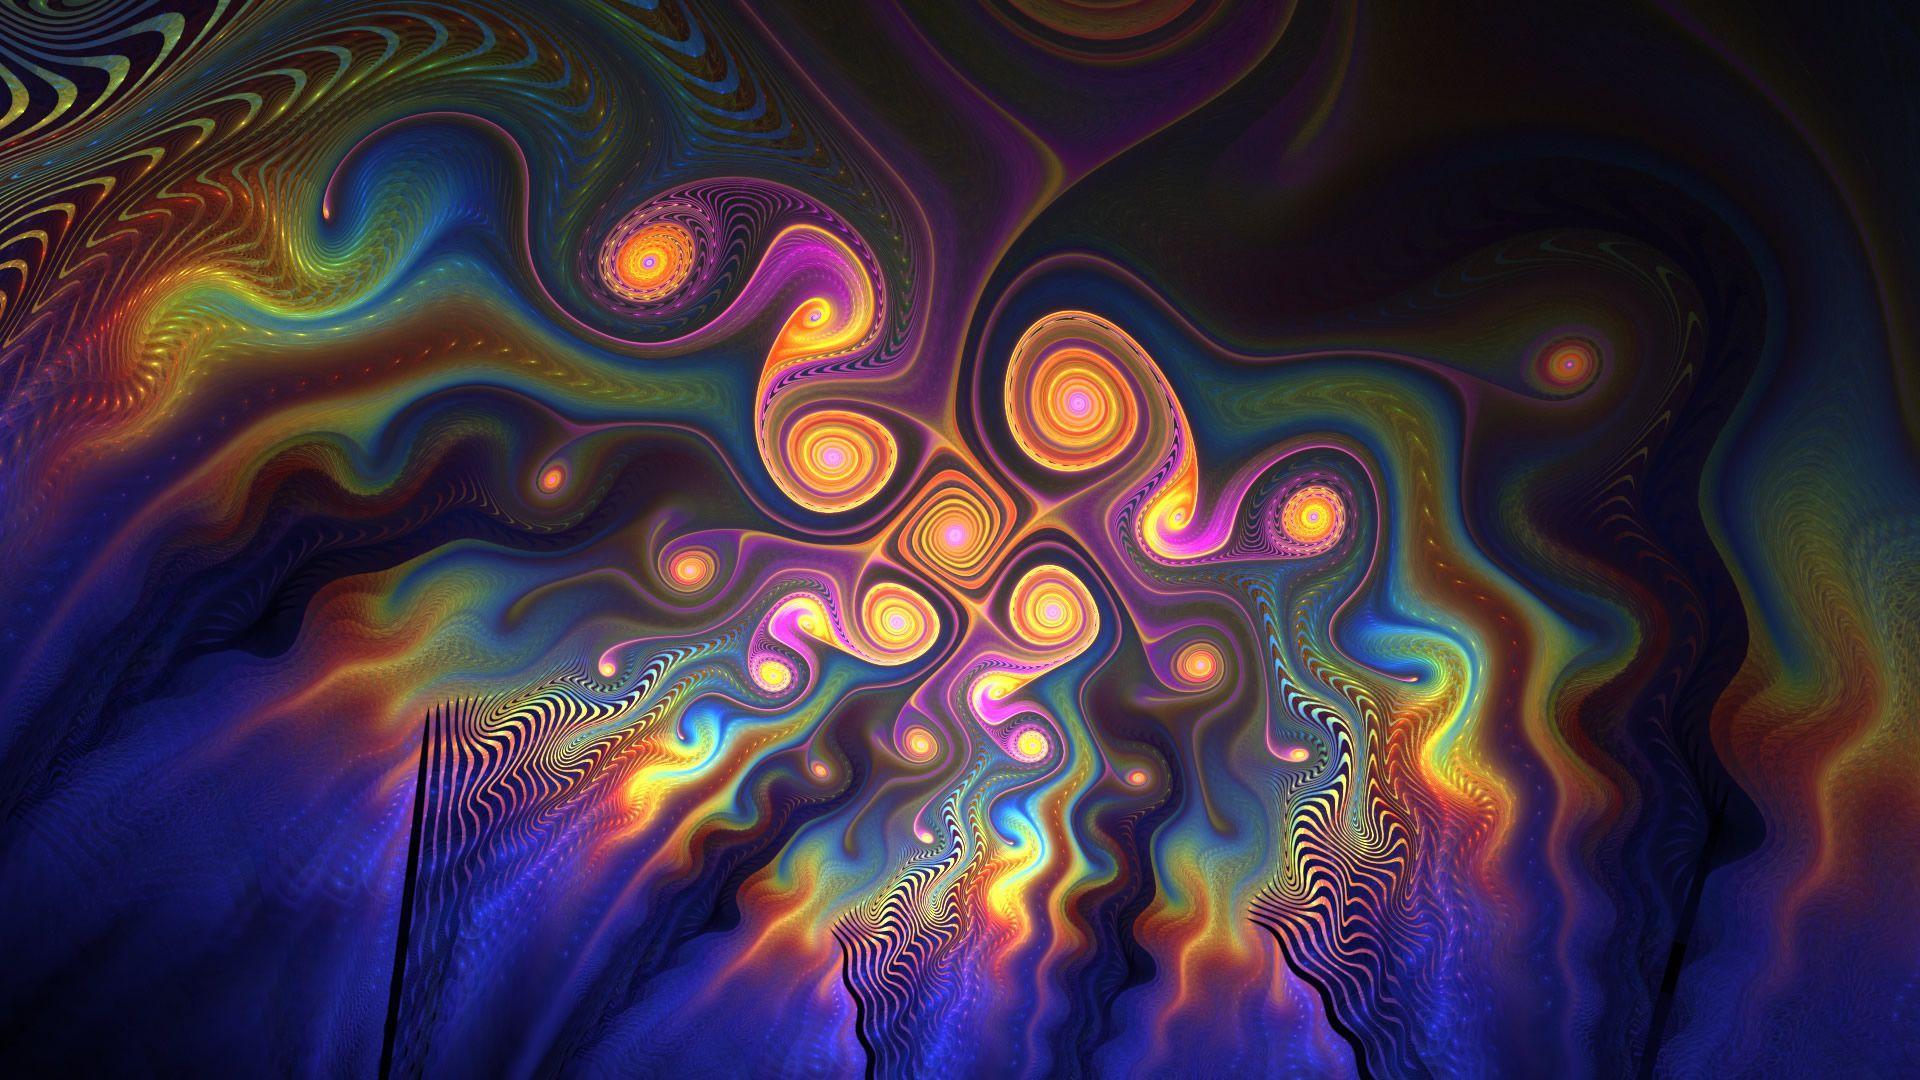 Download Fractal wallpapers for mobile phone free Fractal HD pictures